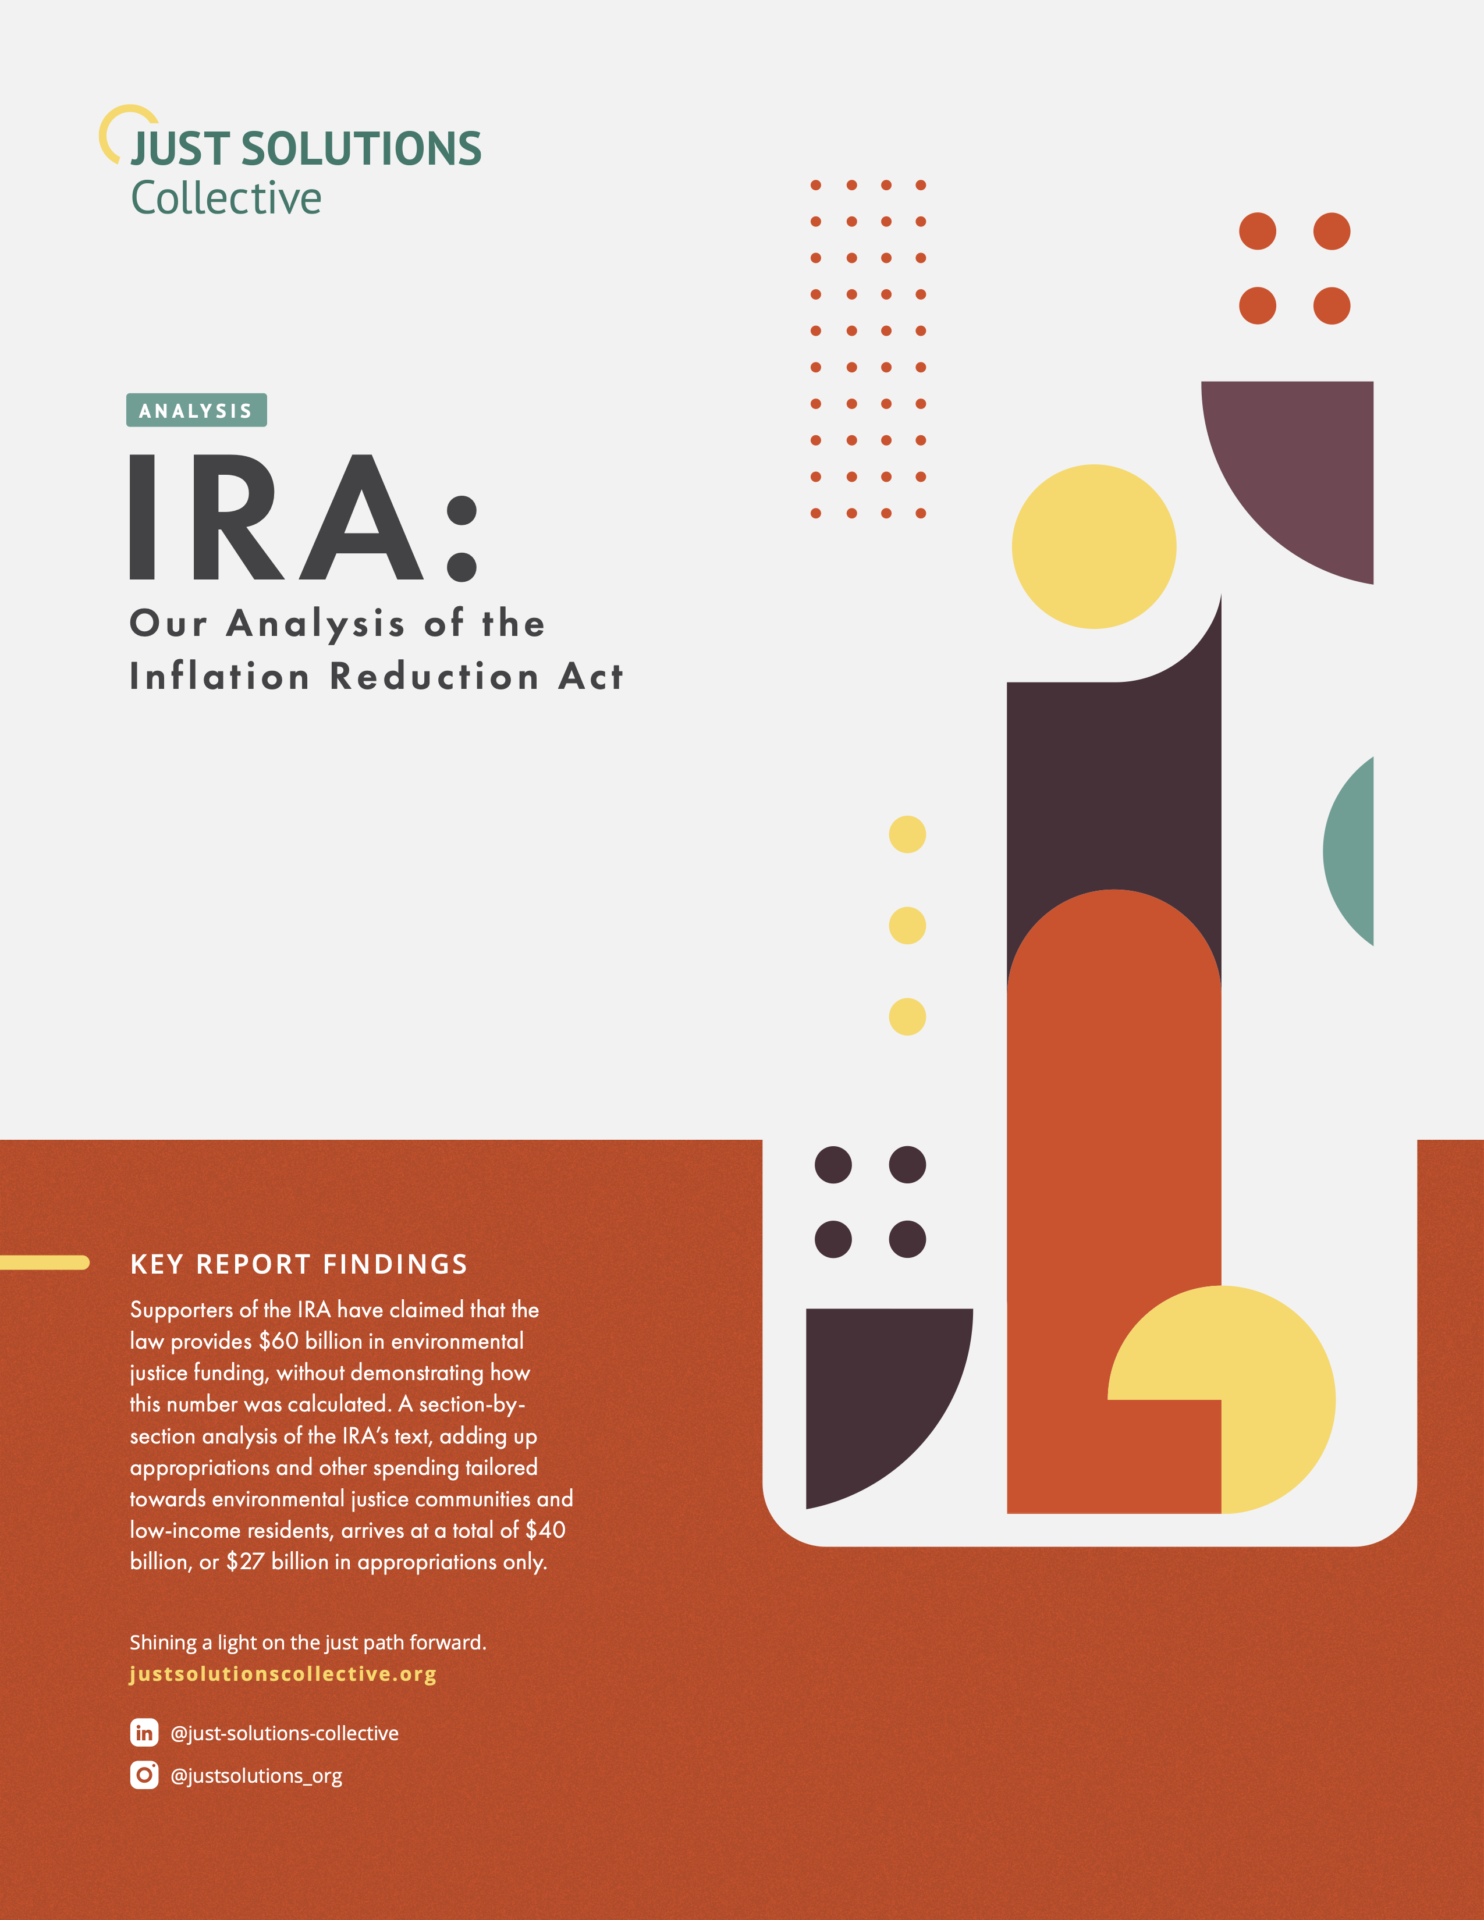 JSC IRA Analysis of the Inflations Reduction Act by Sylvia Chi